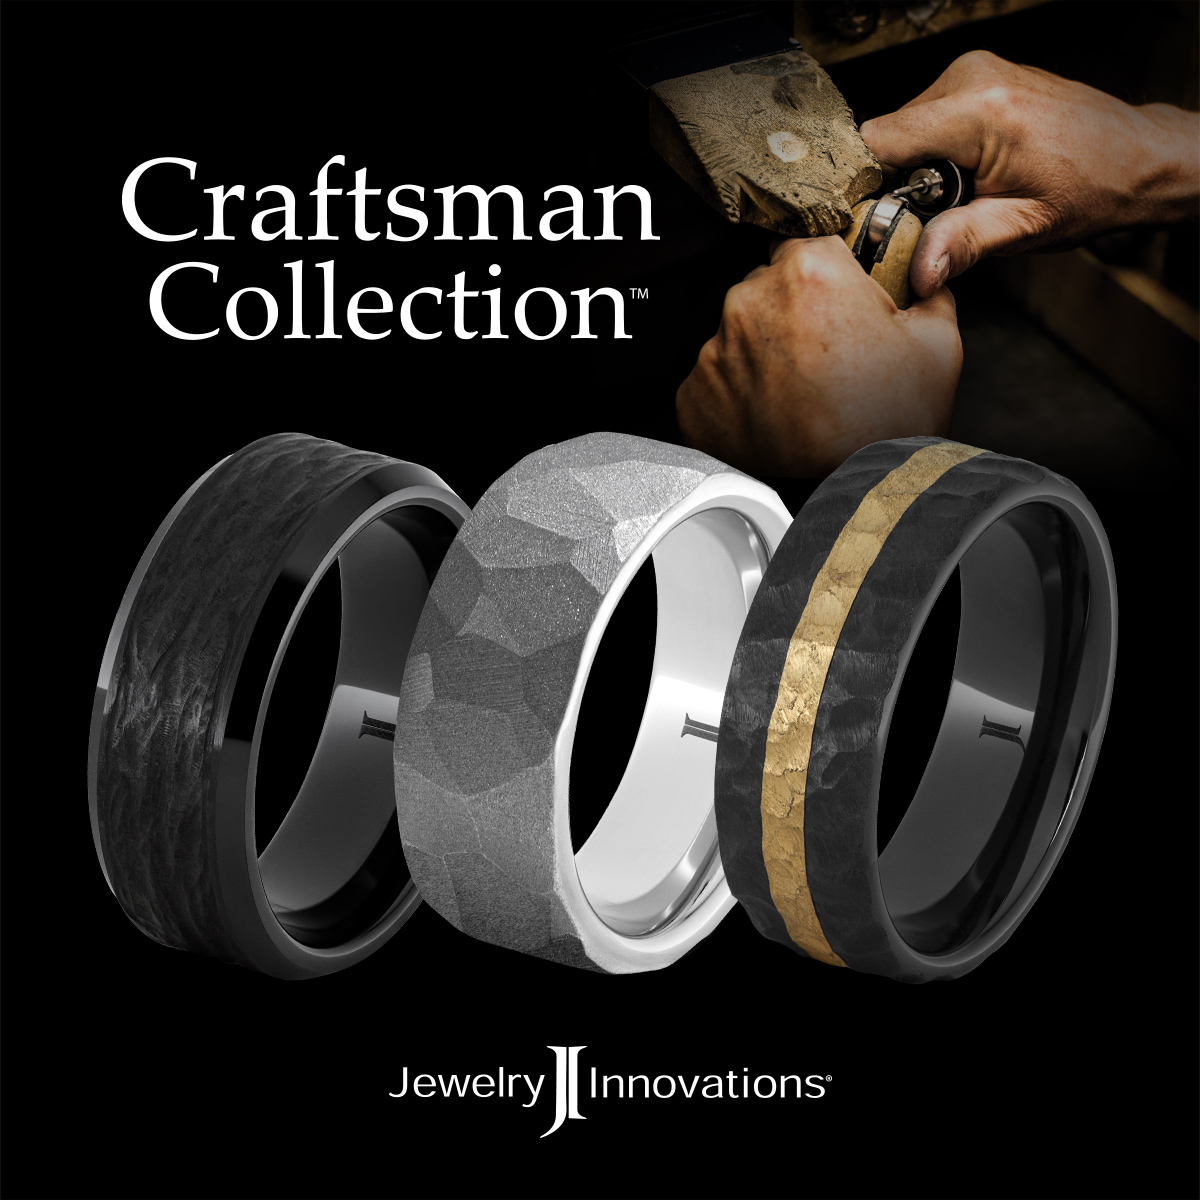 Craftsman Collection